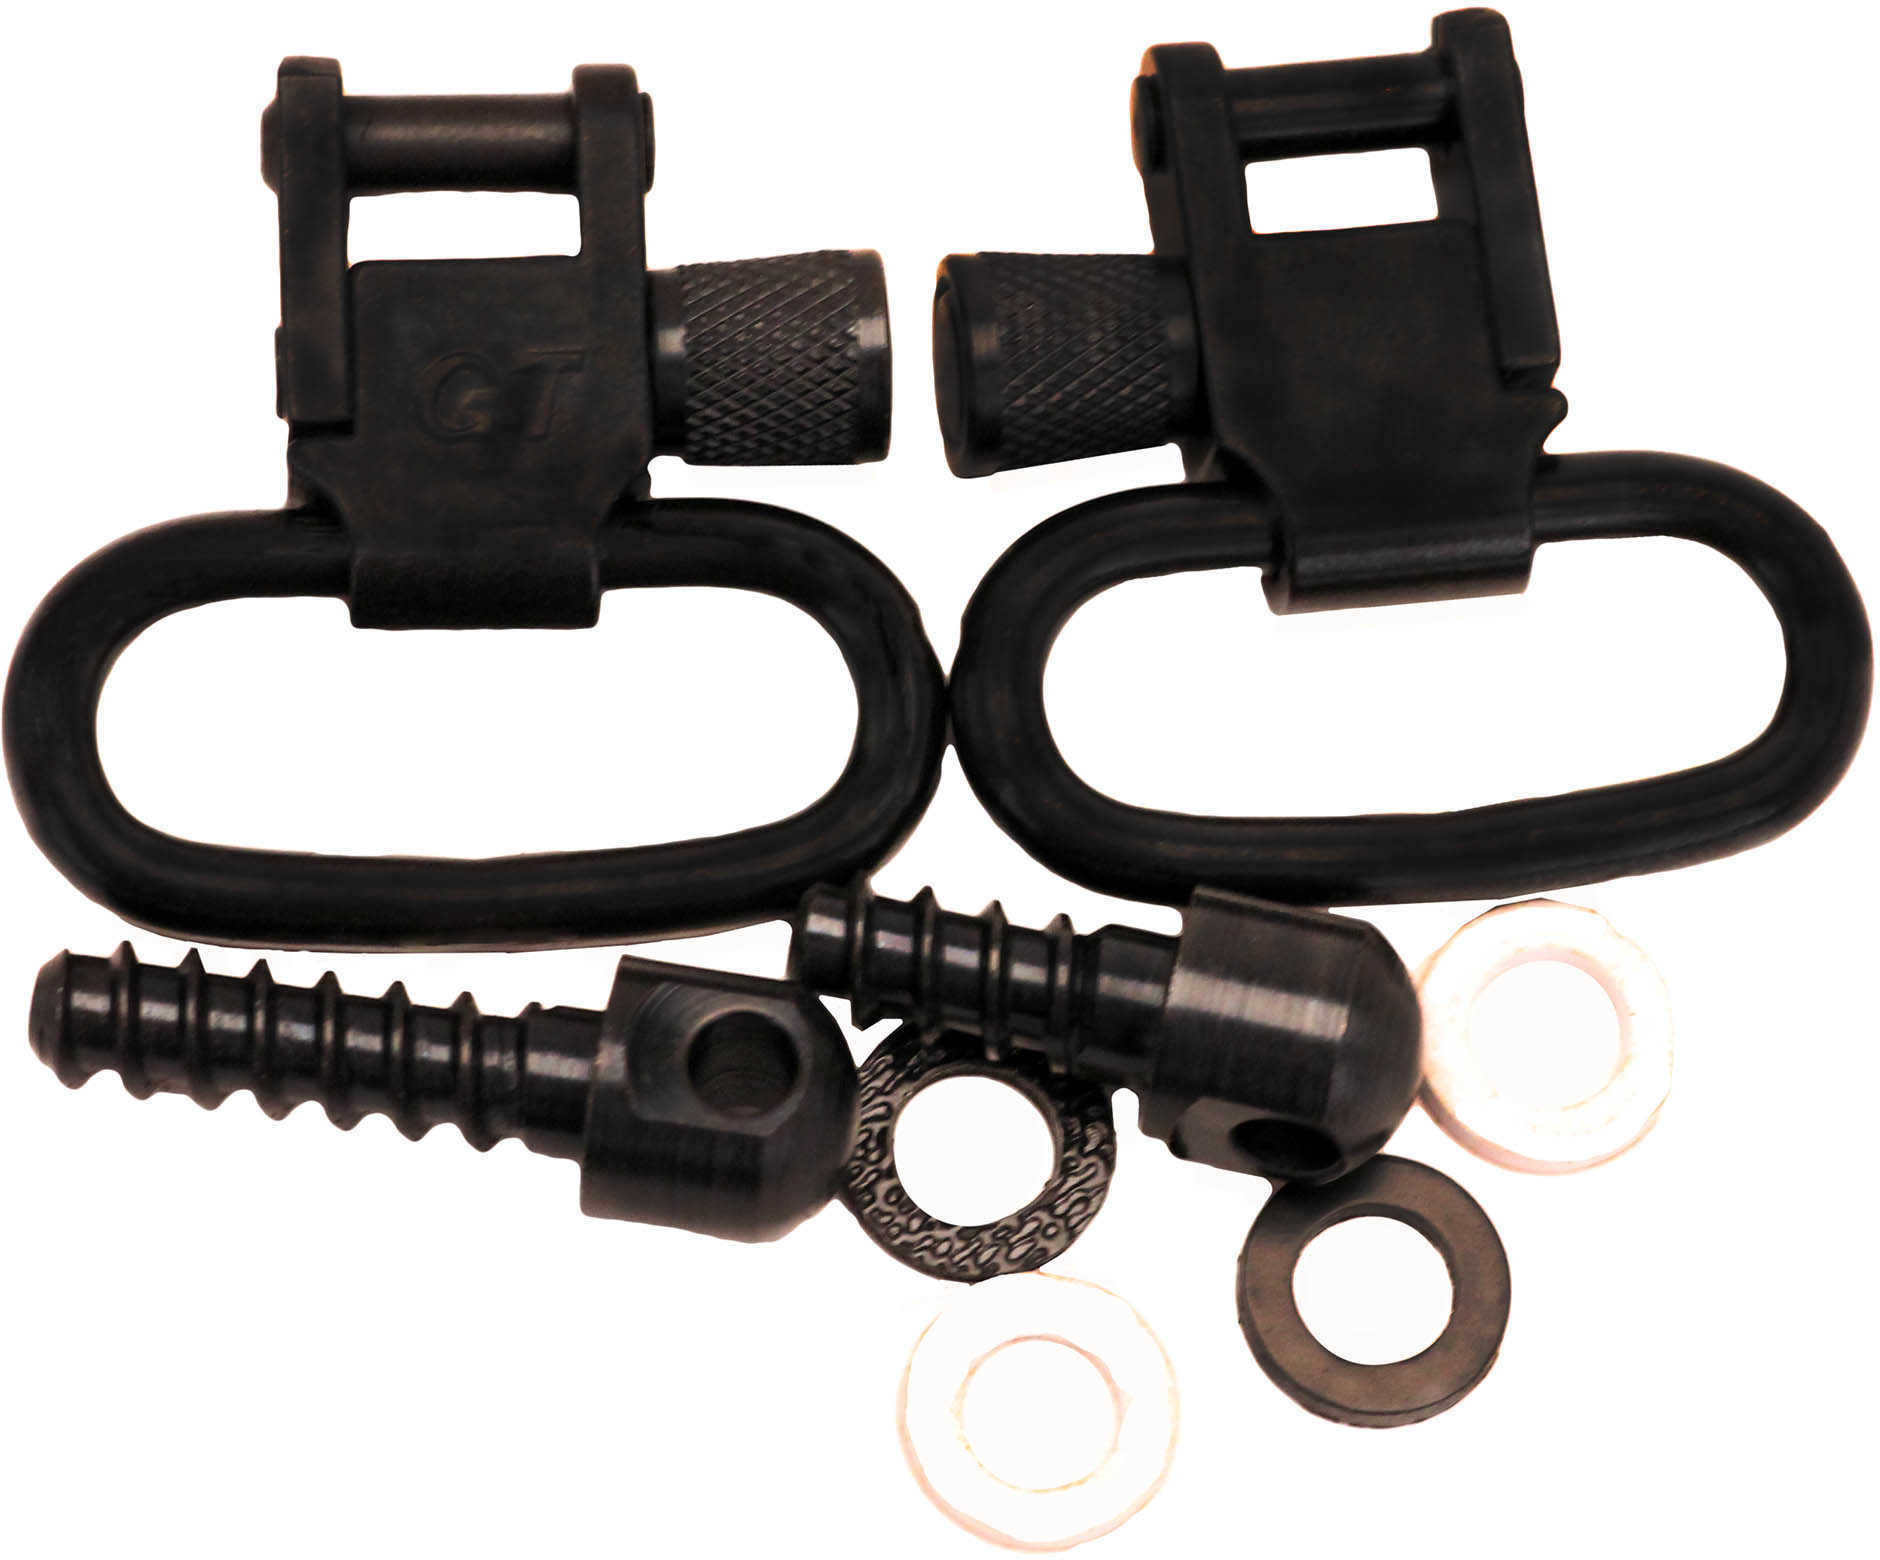 Grovtec USA Inc. Swivel Set With Two Wood Screw & Spacers Black